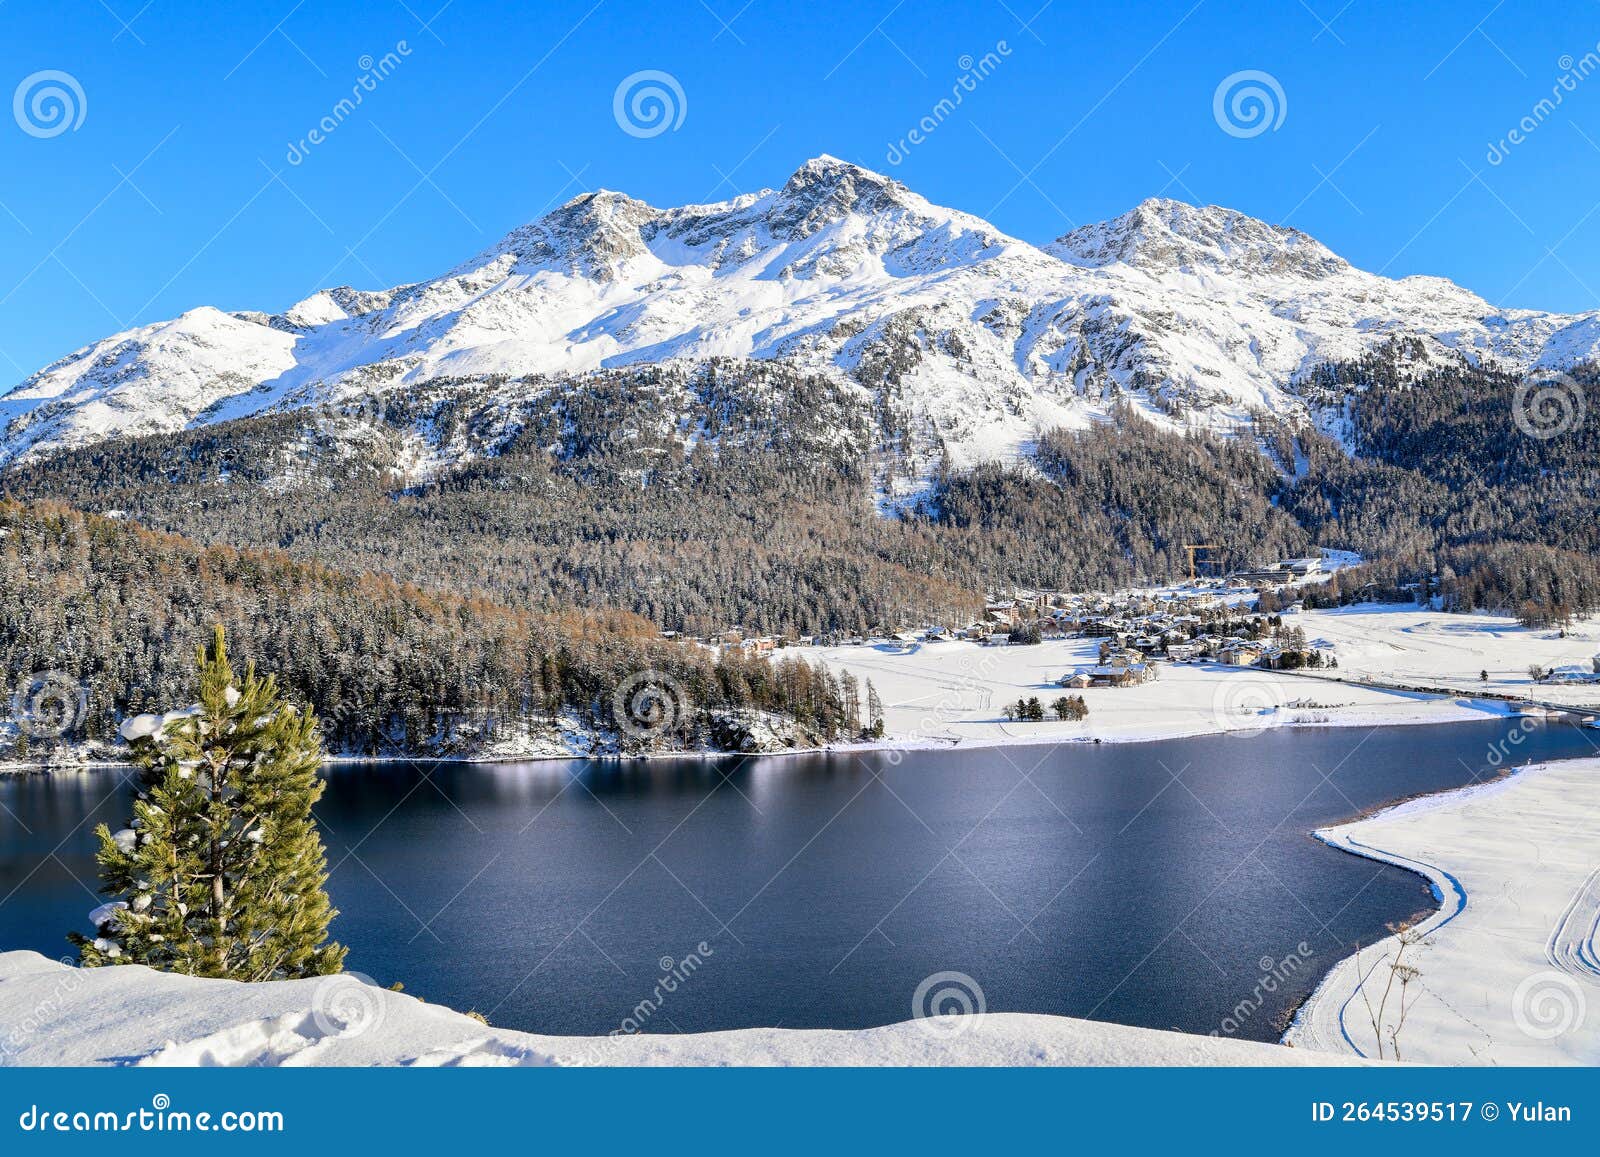 silvaplana lake in winter from high view to piz corvatsch